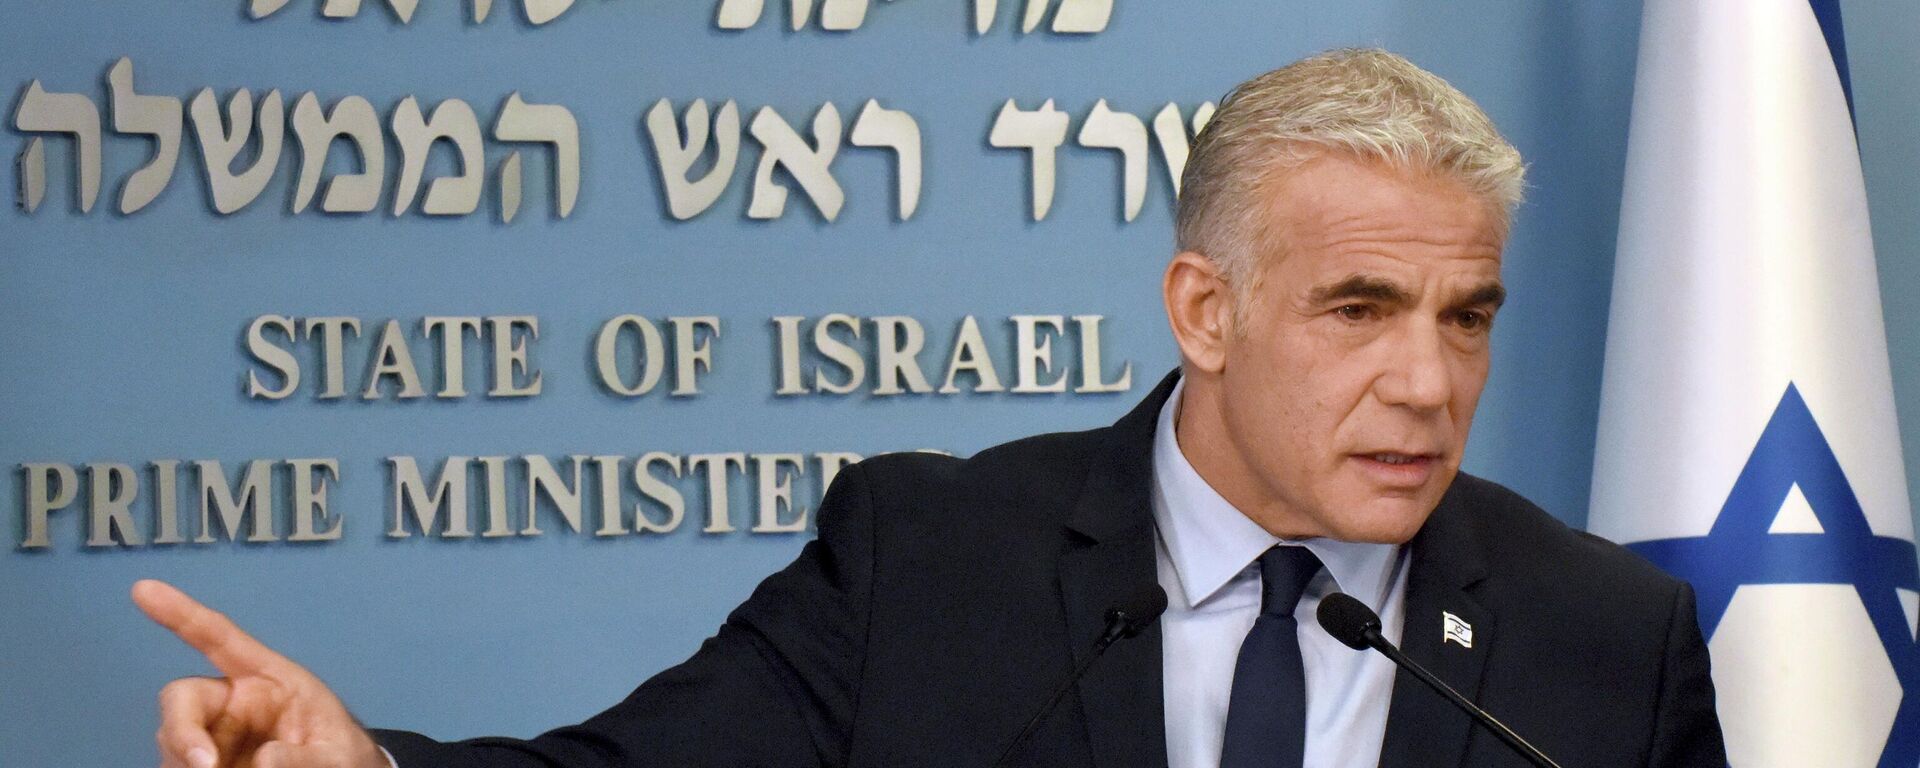 Israeli Prime Minister Yair Lapid speaks about Iran at a security briefing for the foreign press at the Prime Minister's office in Jerusalem, Wednesday, Aug. 24, 2022. Lapid called on U.S. President Joe Biden and Western powers to call off an emerging nuclear deal with Iran, saying an agreement would fail to prevent Iran from developing a nuclear bomb and reward it with billions of dollars to fund Israel's enemies. Israel's caretaker prime minister used stark language on Wednesday in his criticism of the expected agreement. (Debbie Hill/Pool via AP) - Sputnik International, 1920, 22.09.2022